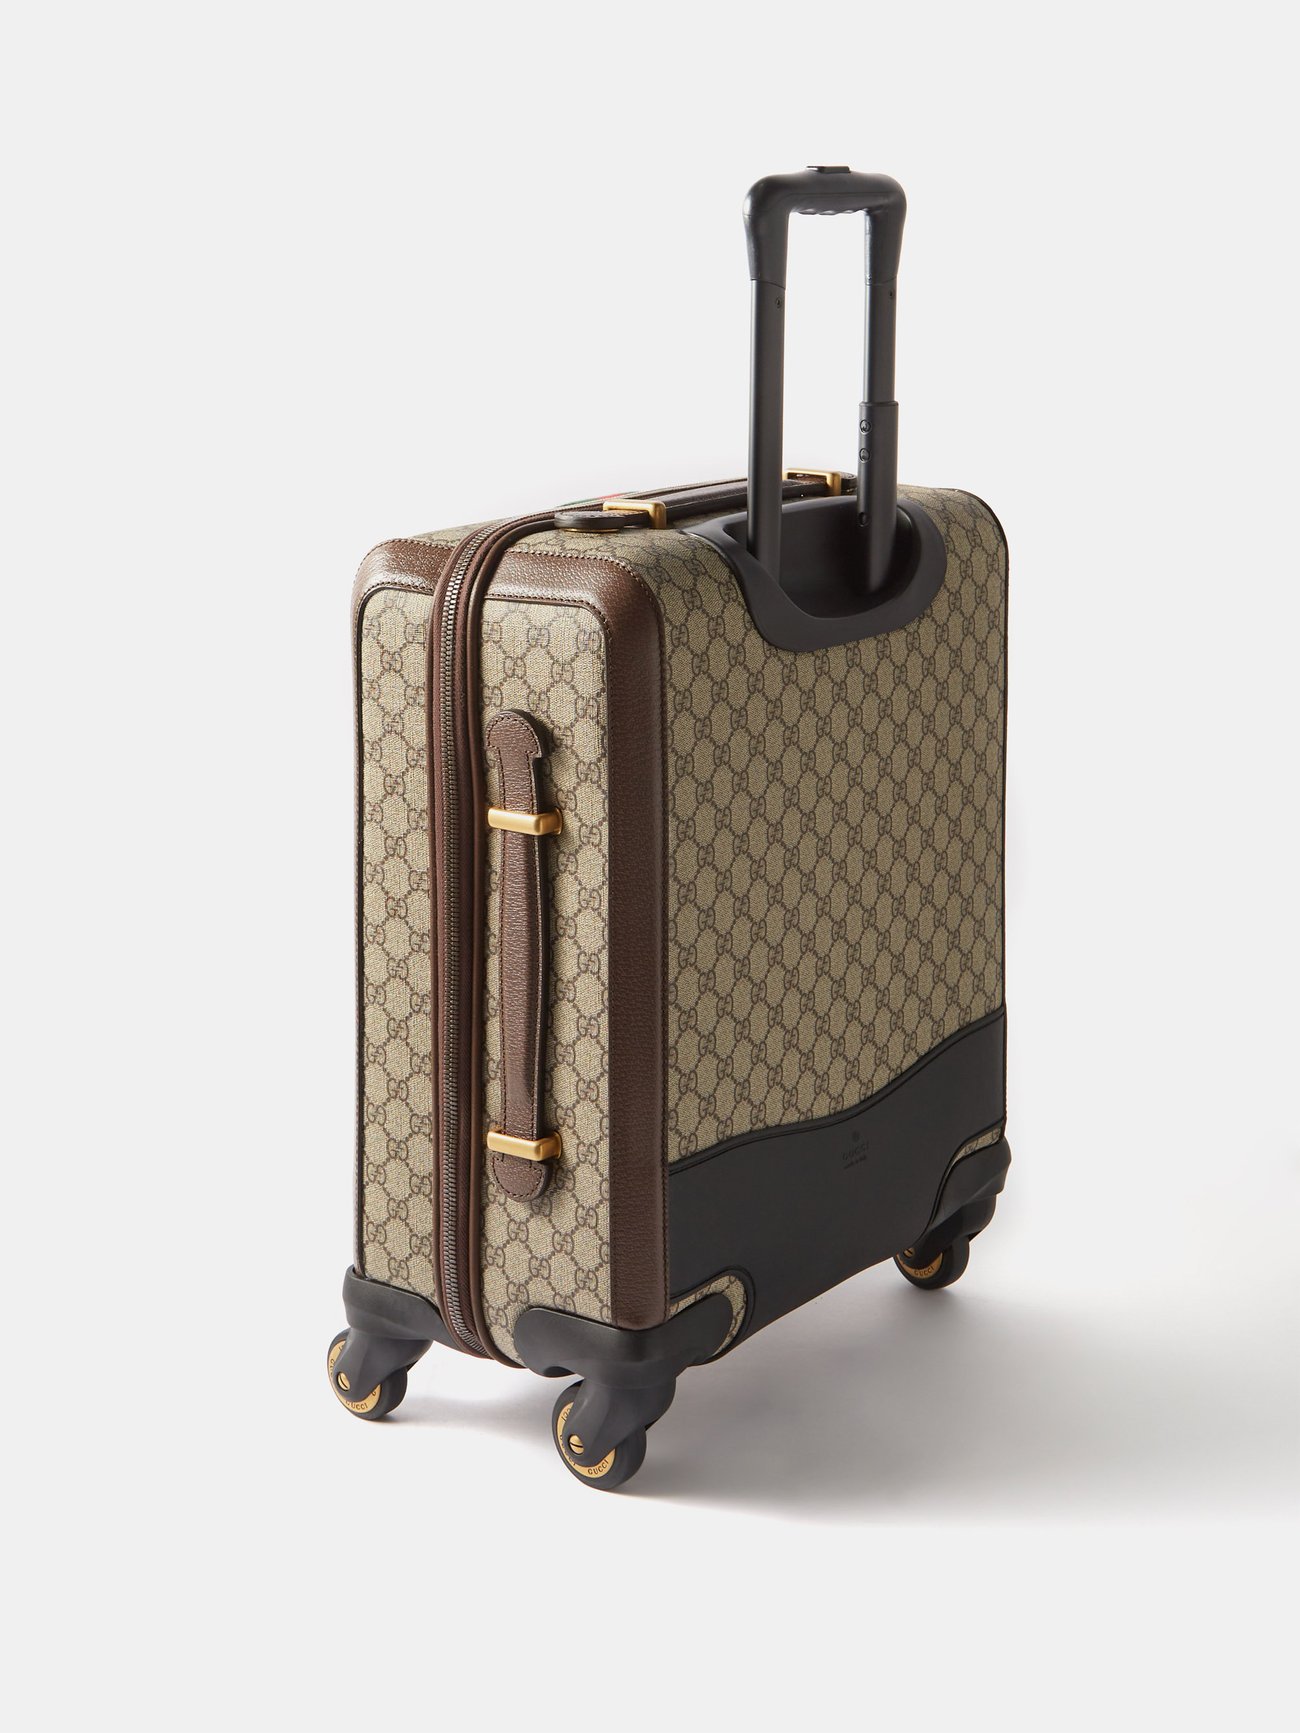 Beige Savoy GG Supreme canvas carry-on suitcase, Gucci